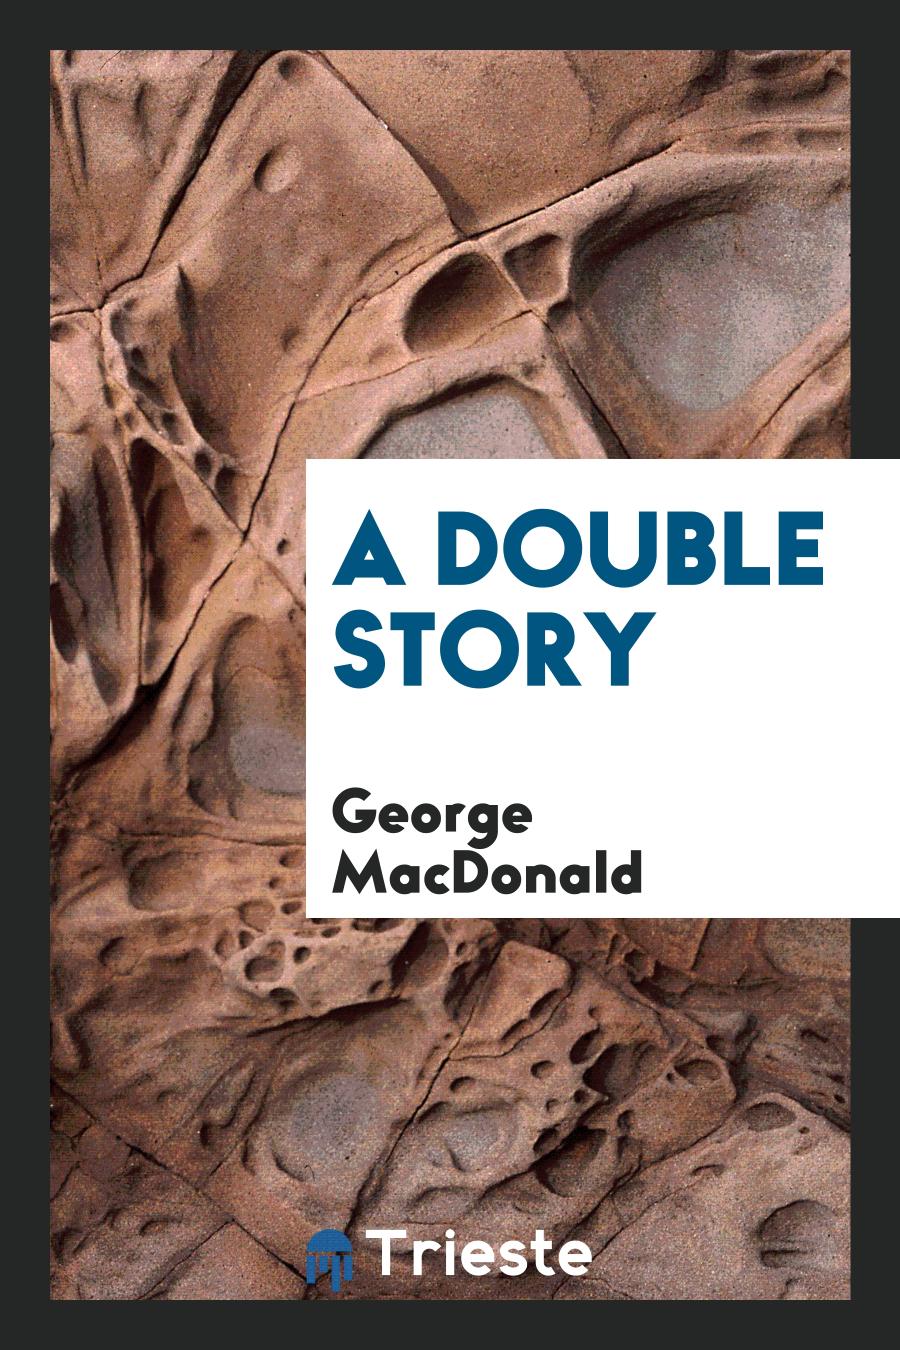 A double story